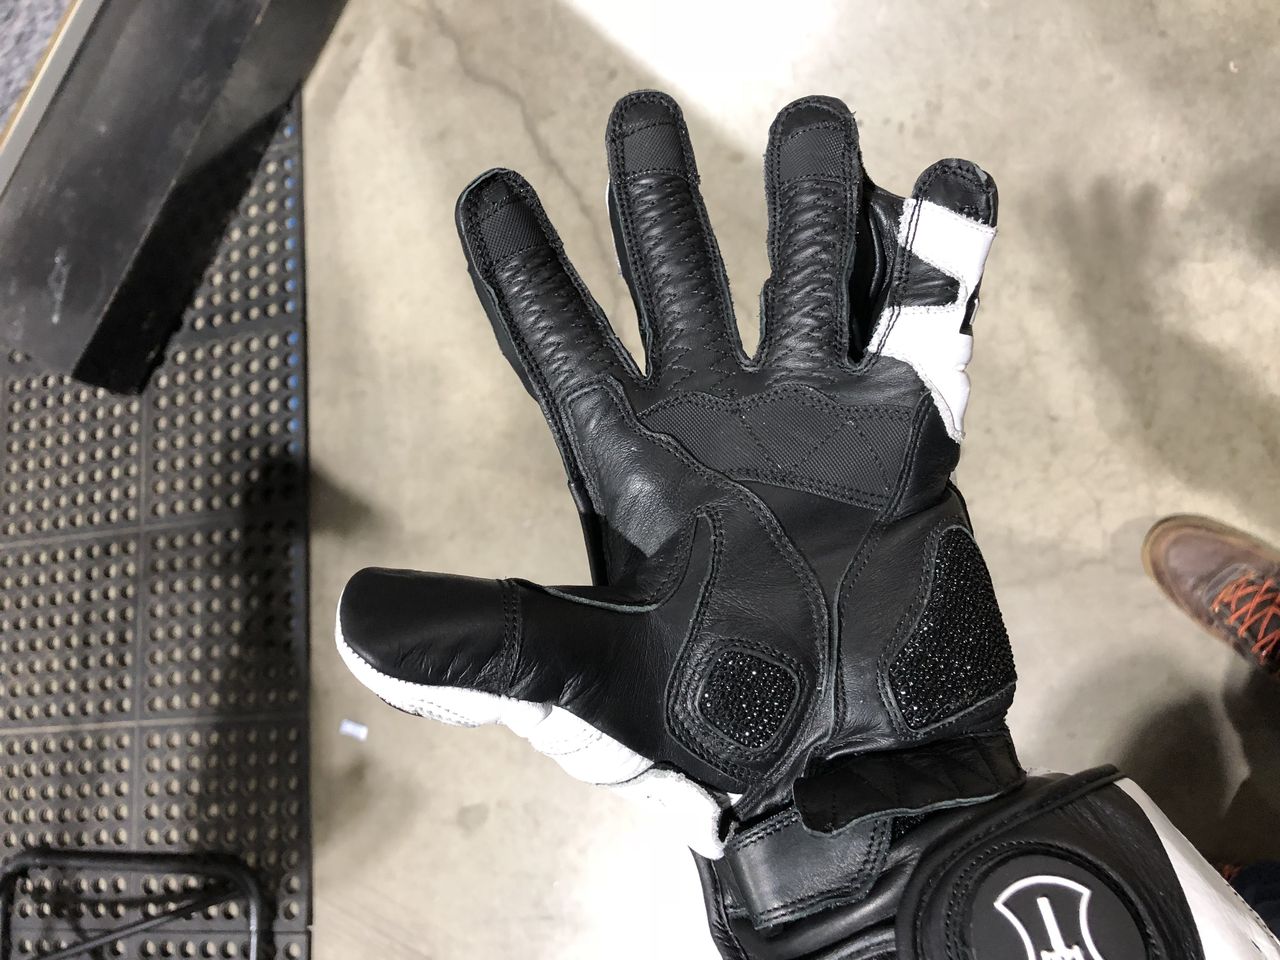 The SP-R Pro V1 gloves feature stingray fish skin palms and a connected pinky and ring fingers